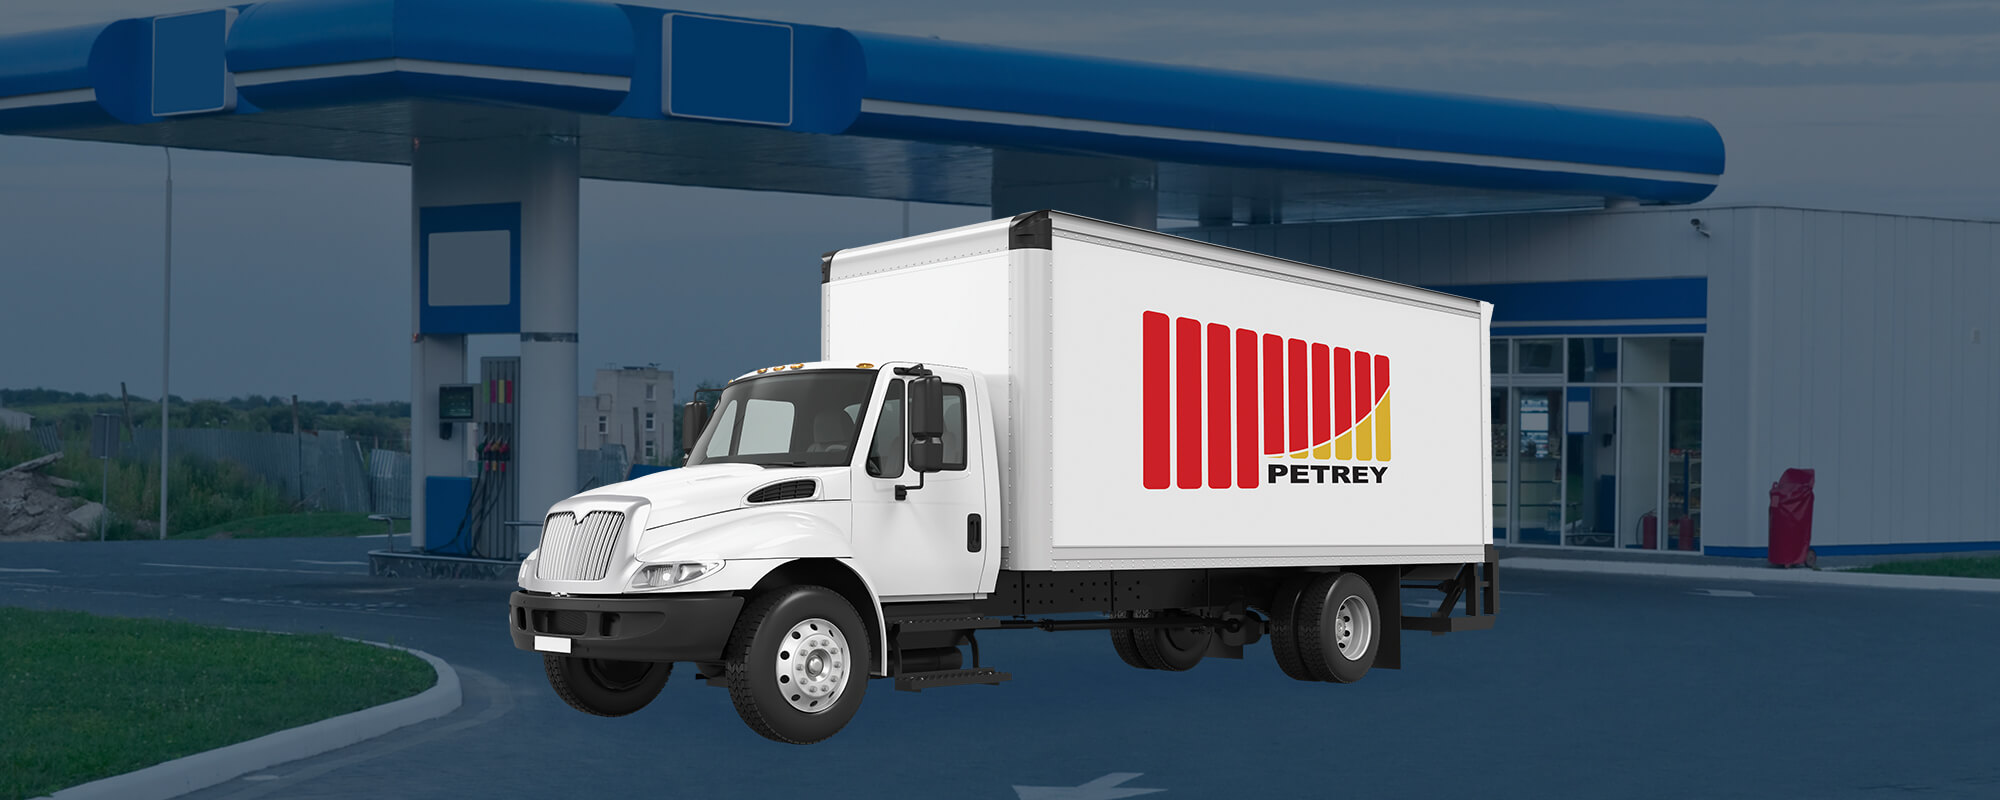 White delivery box truck with PETREY's company logo on it and blue gas station in the background. 